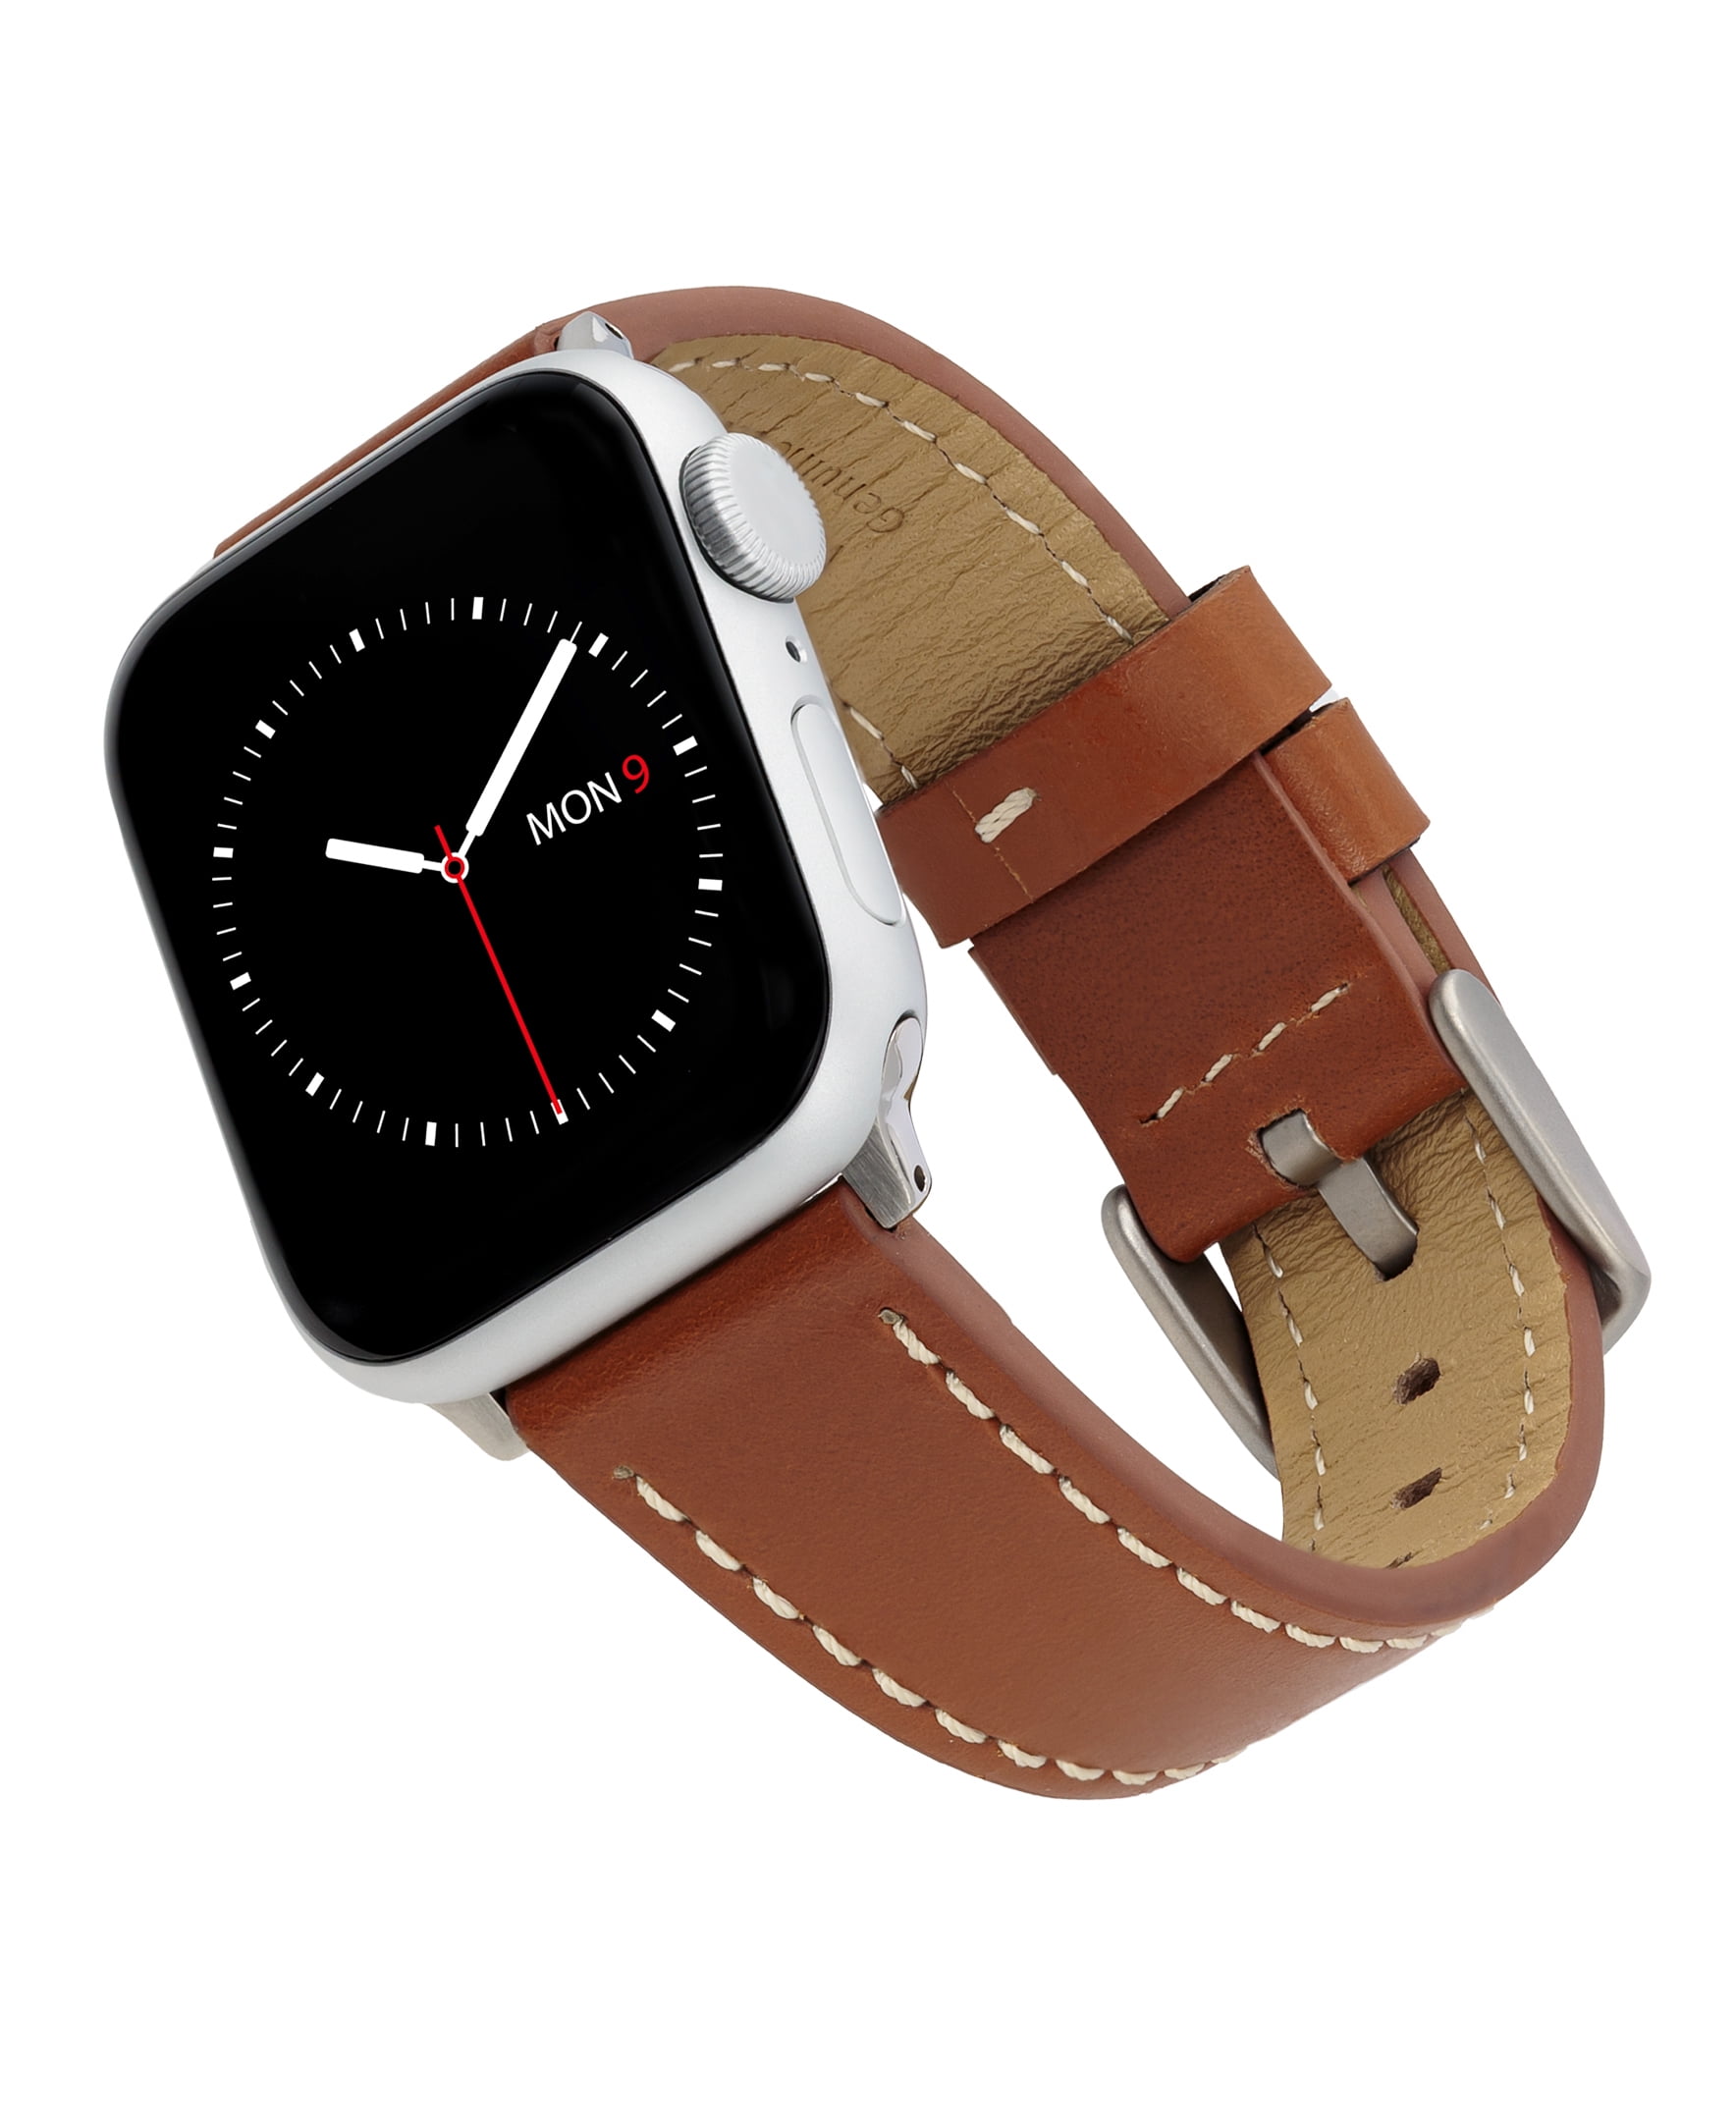 Homepage  Watch bands, Leather watch bands, Apple watch bands leather